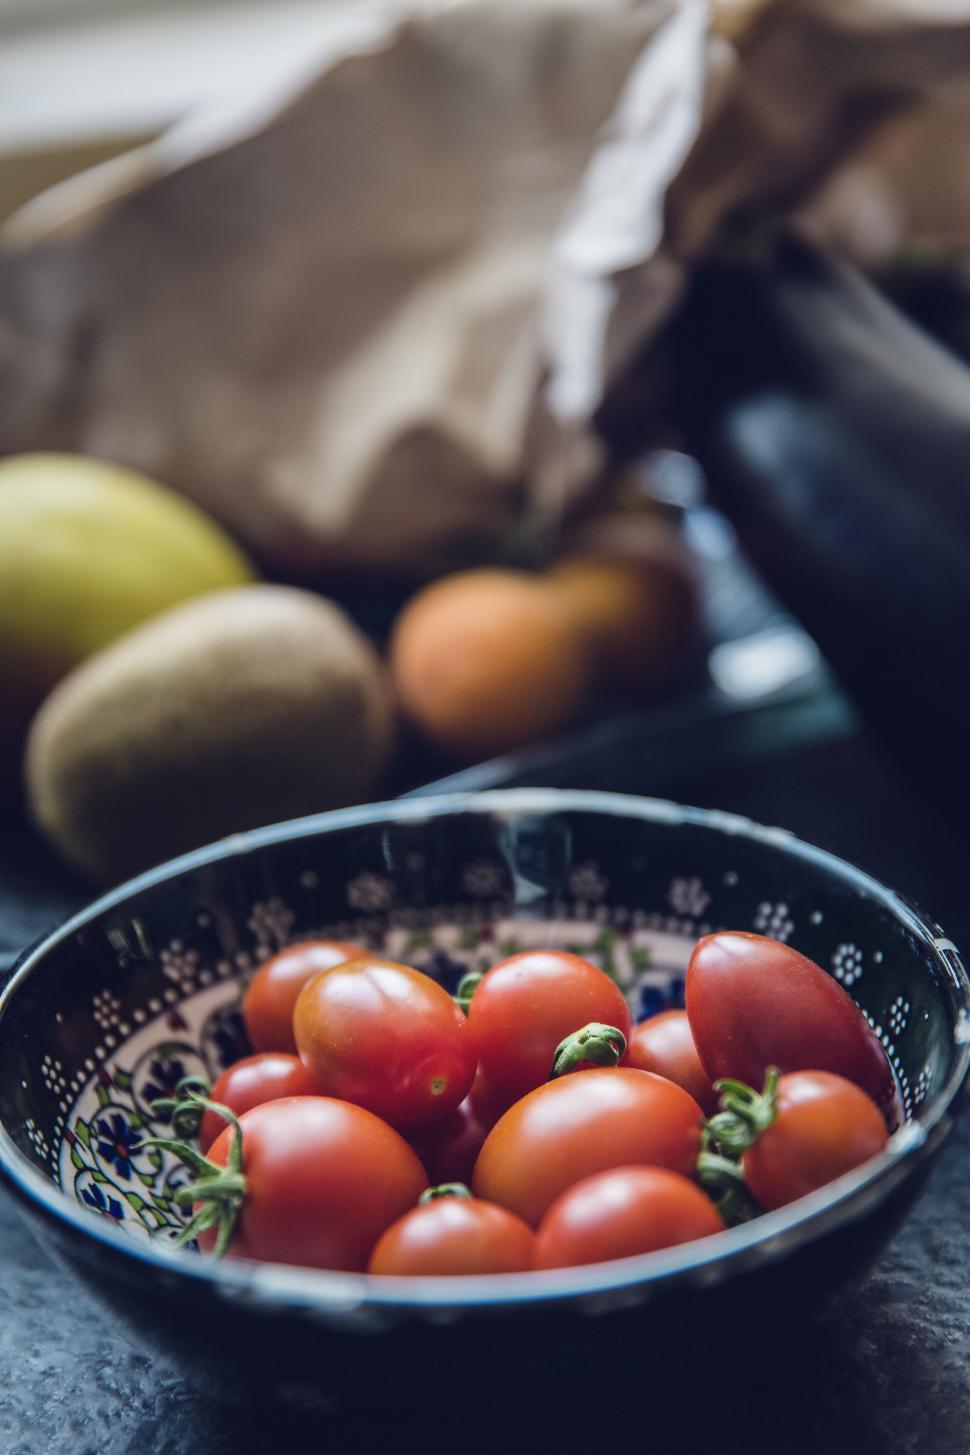 Free Image of Bowl of fresh tomatoes on kitchen counter 